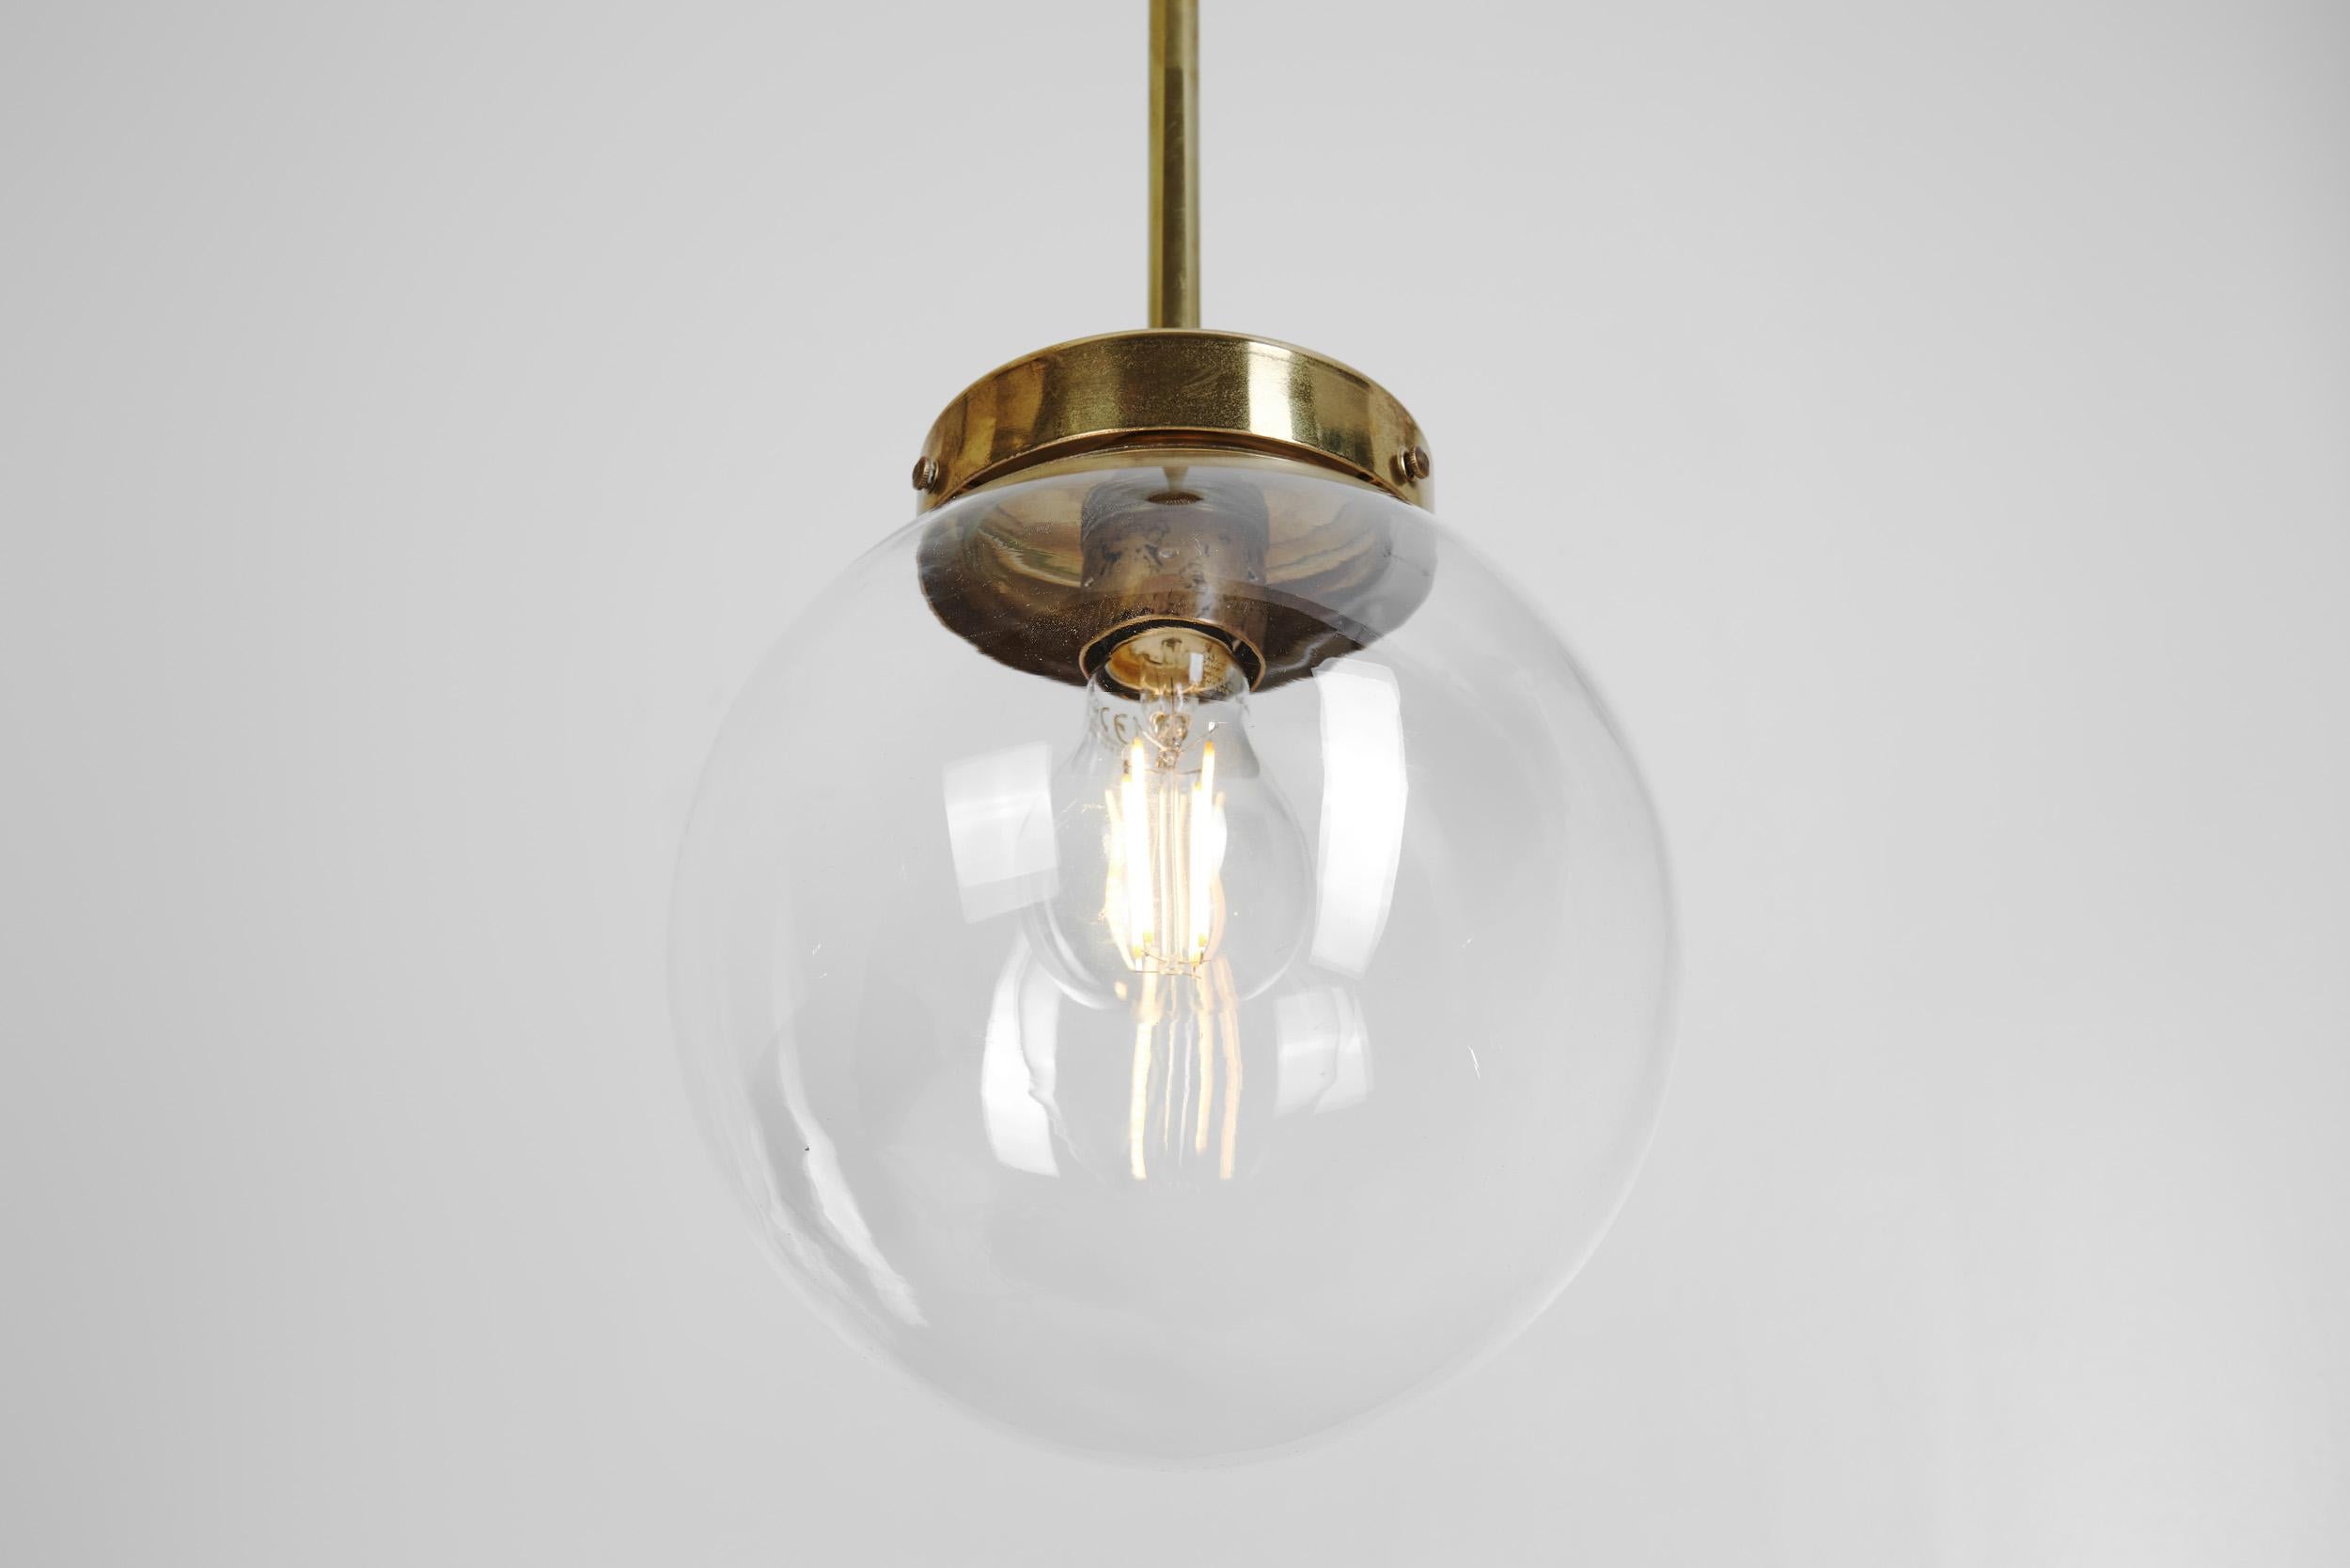 Mid-Century Modern Brass and Glass Ceiling Lamp, Europe ca 1950s For Sale 5